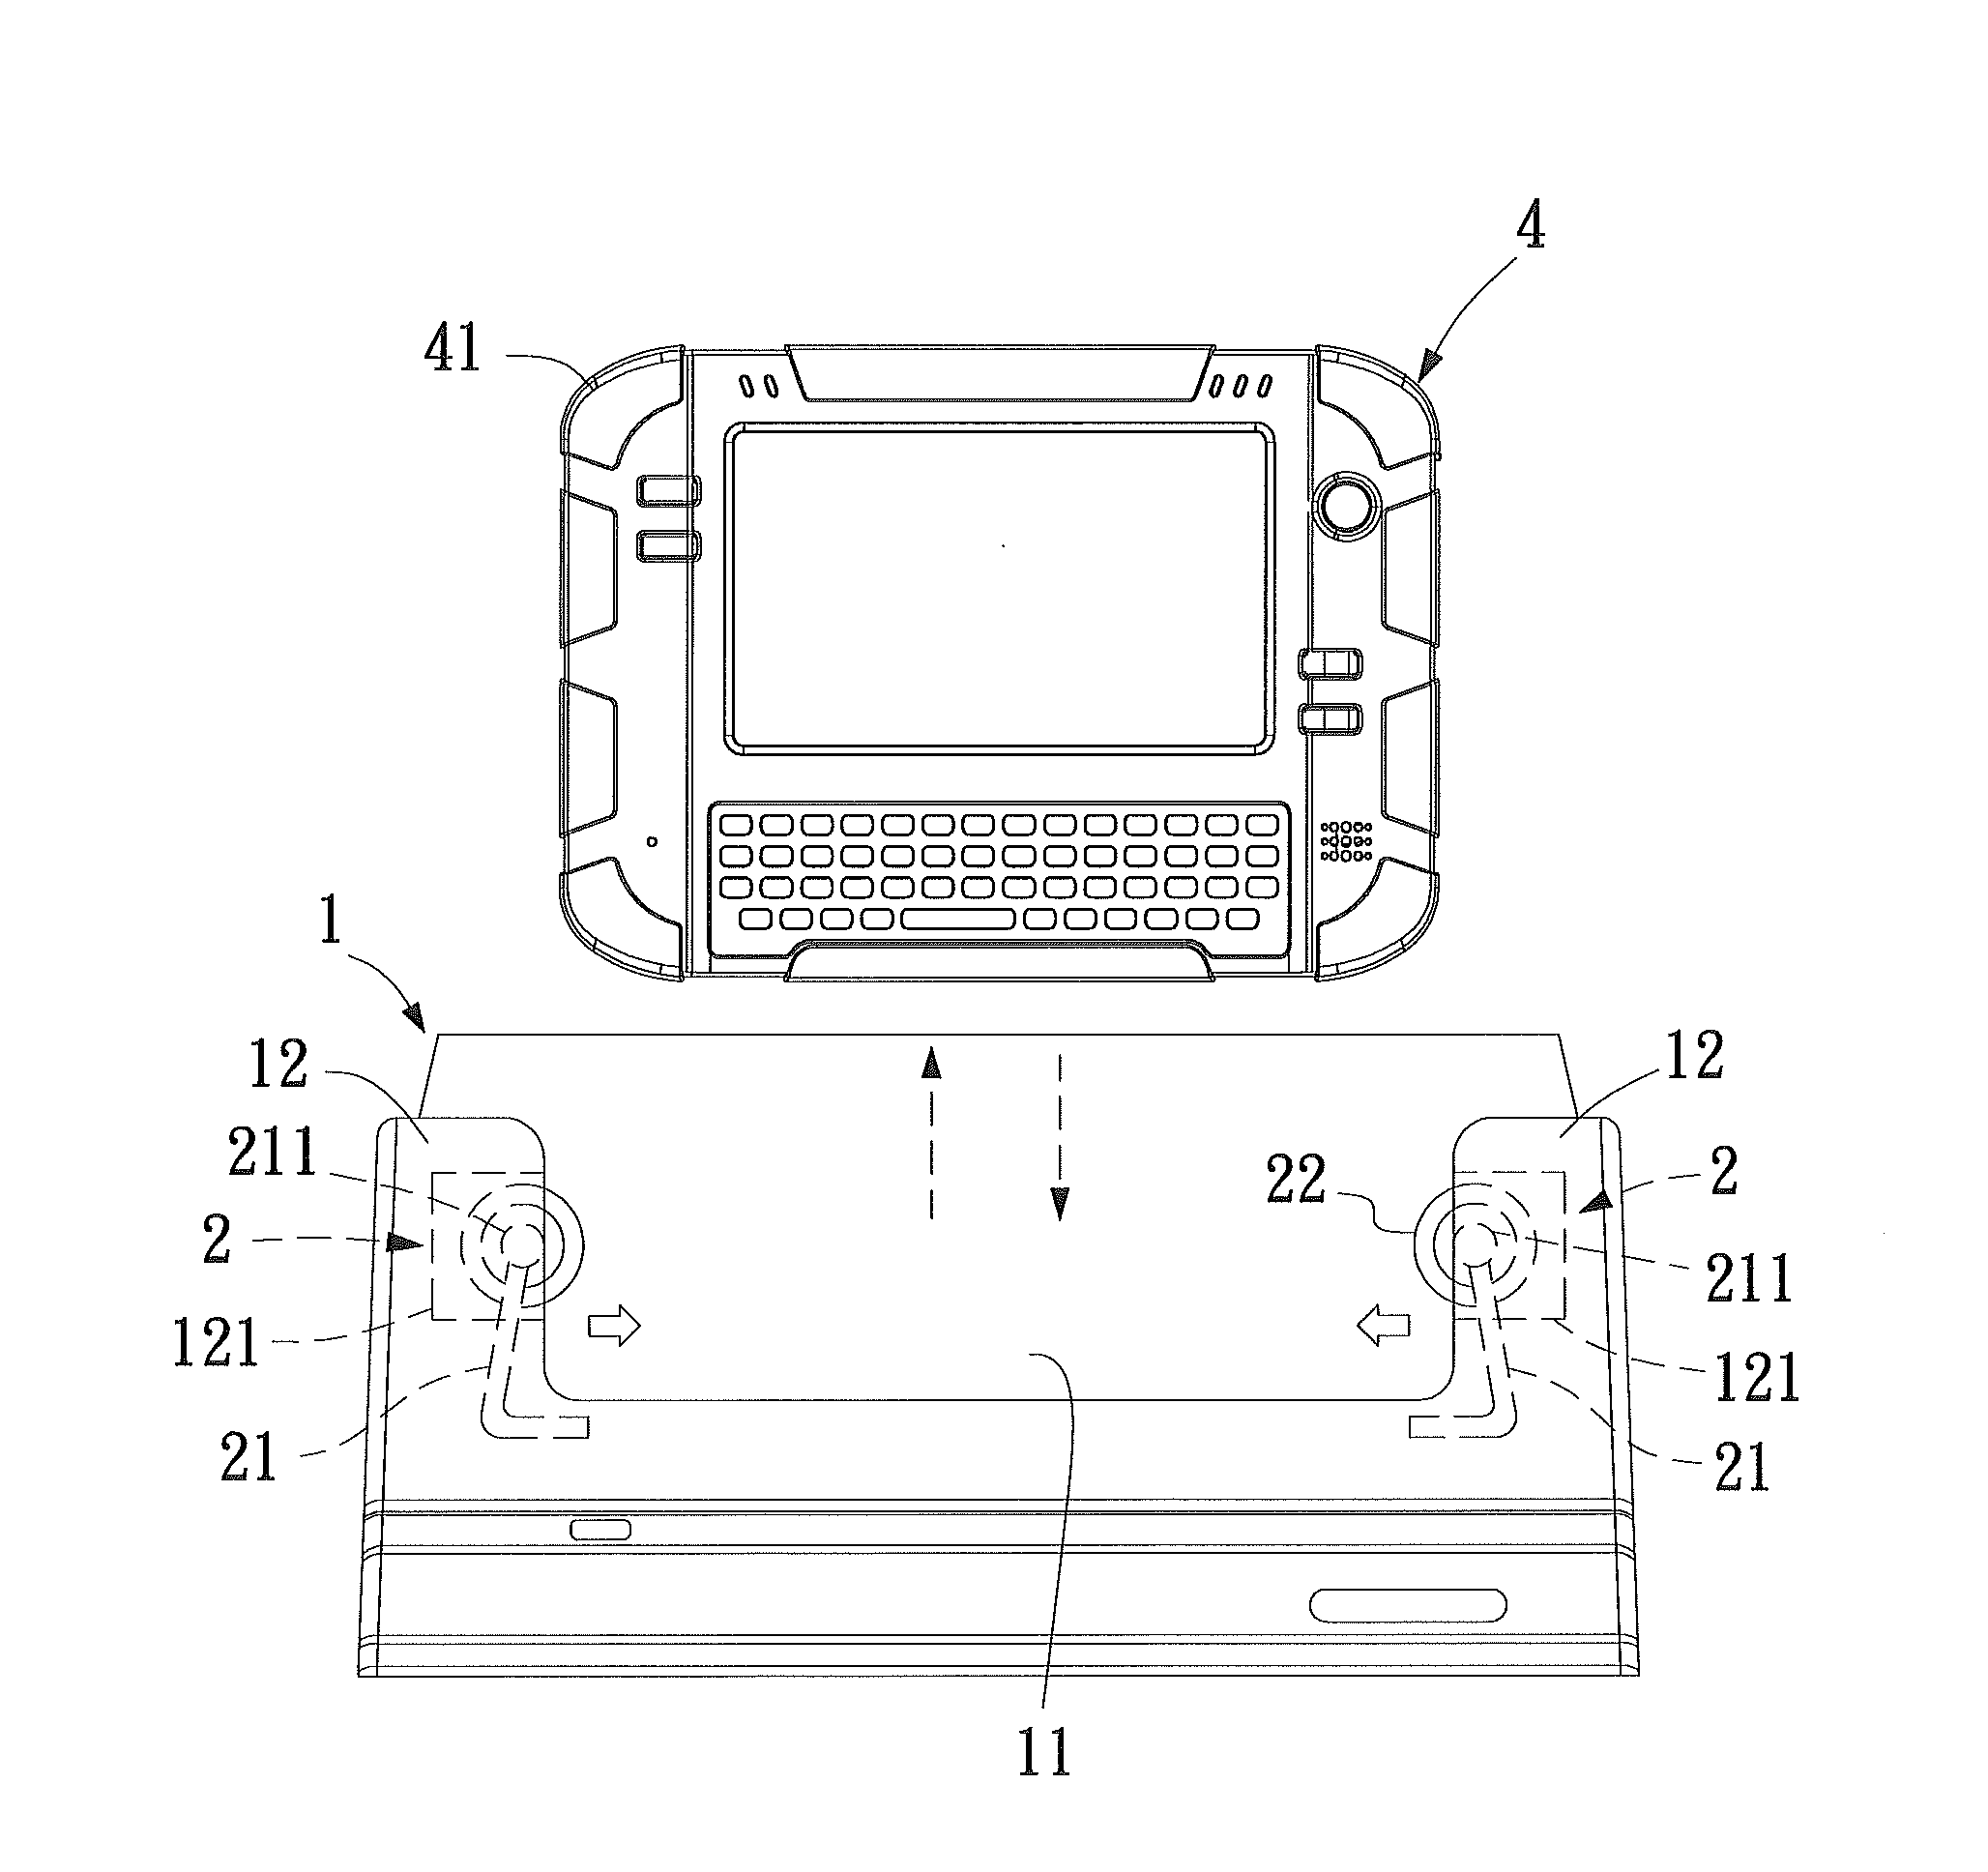 Electronic device carrier